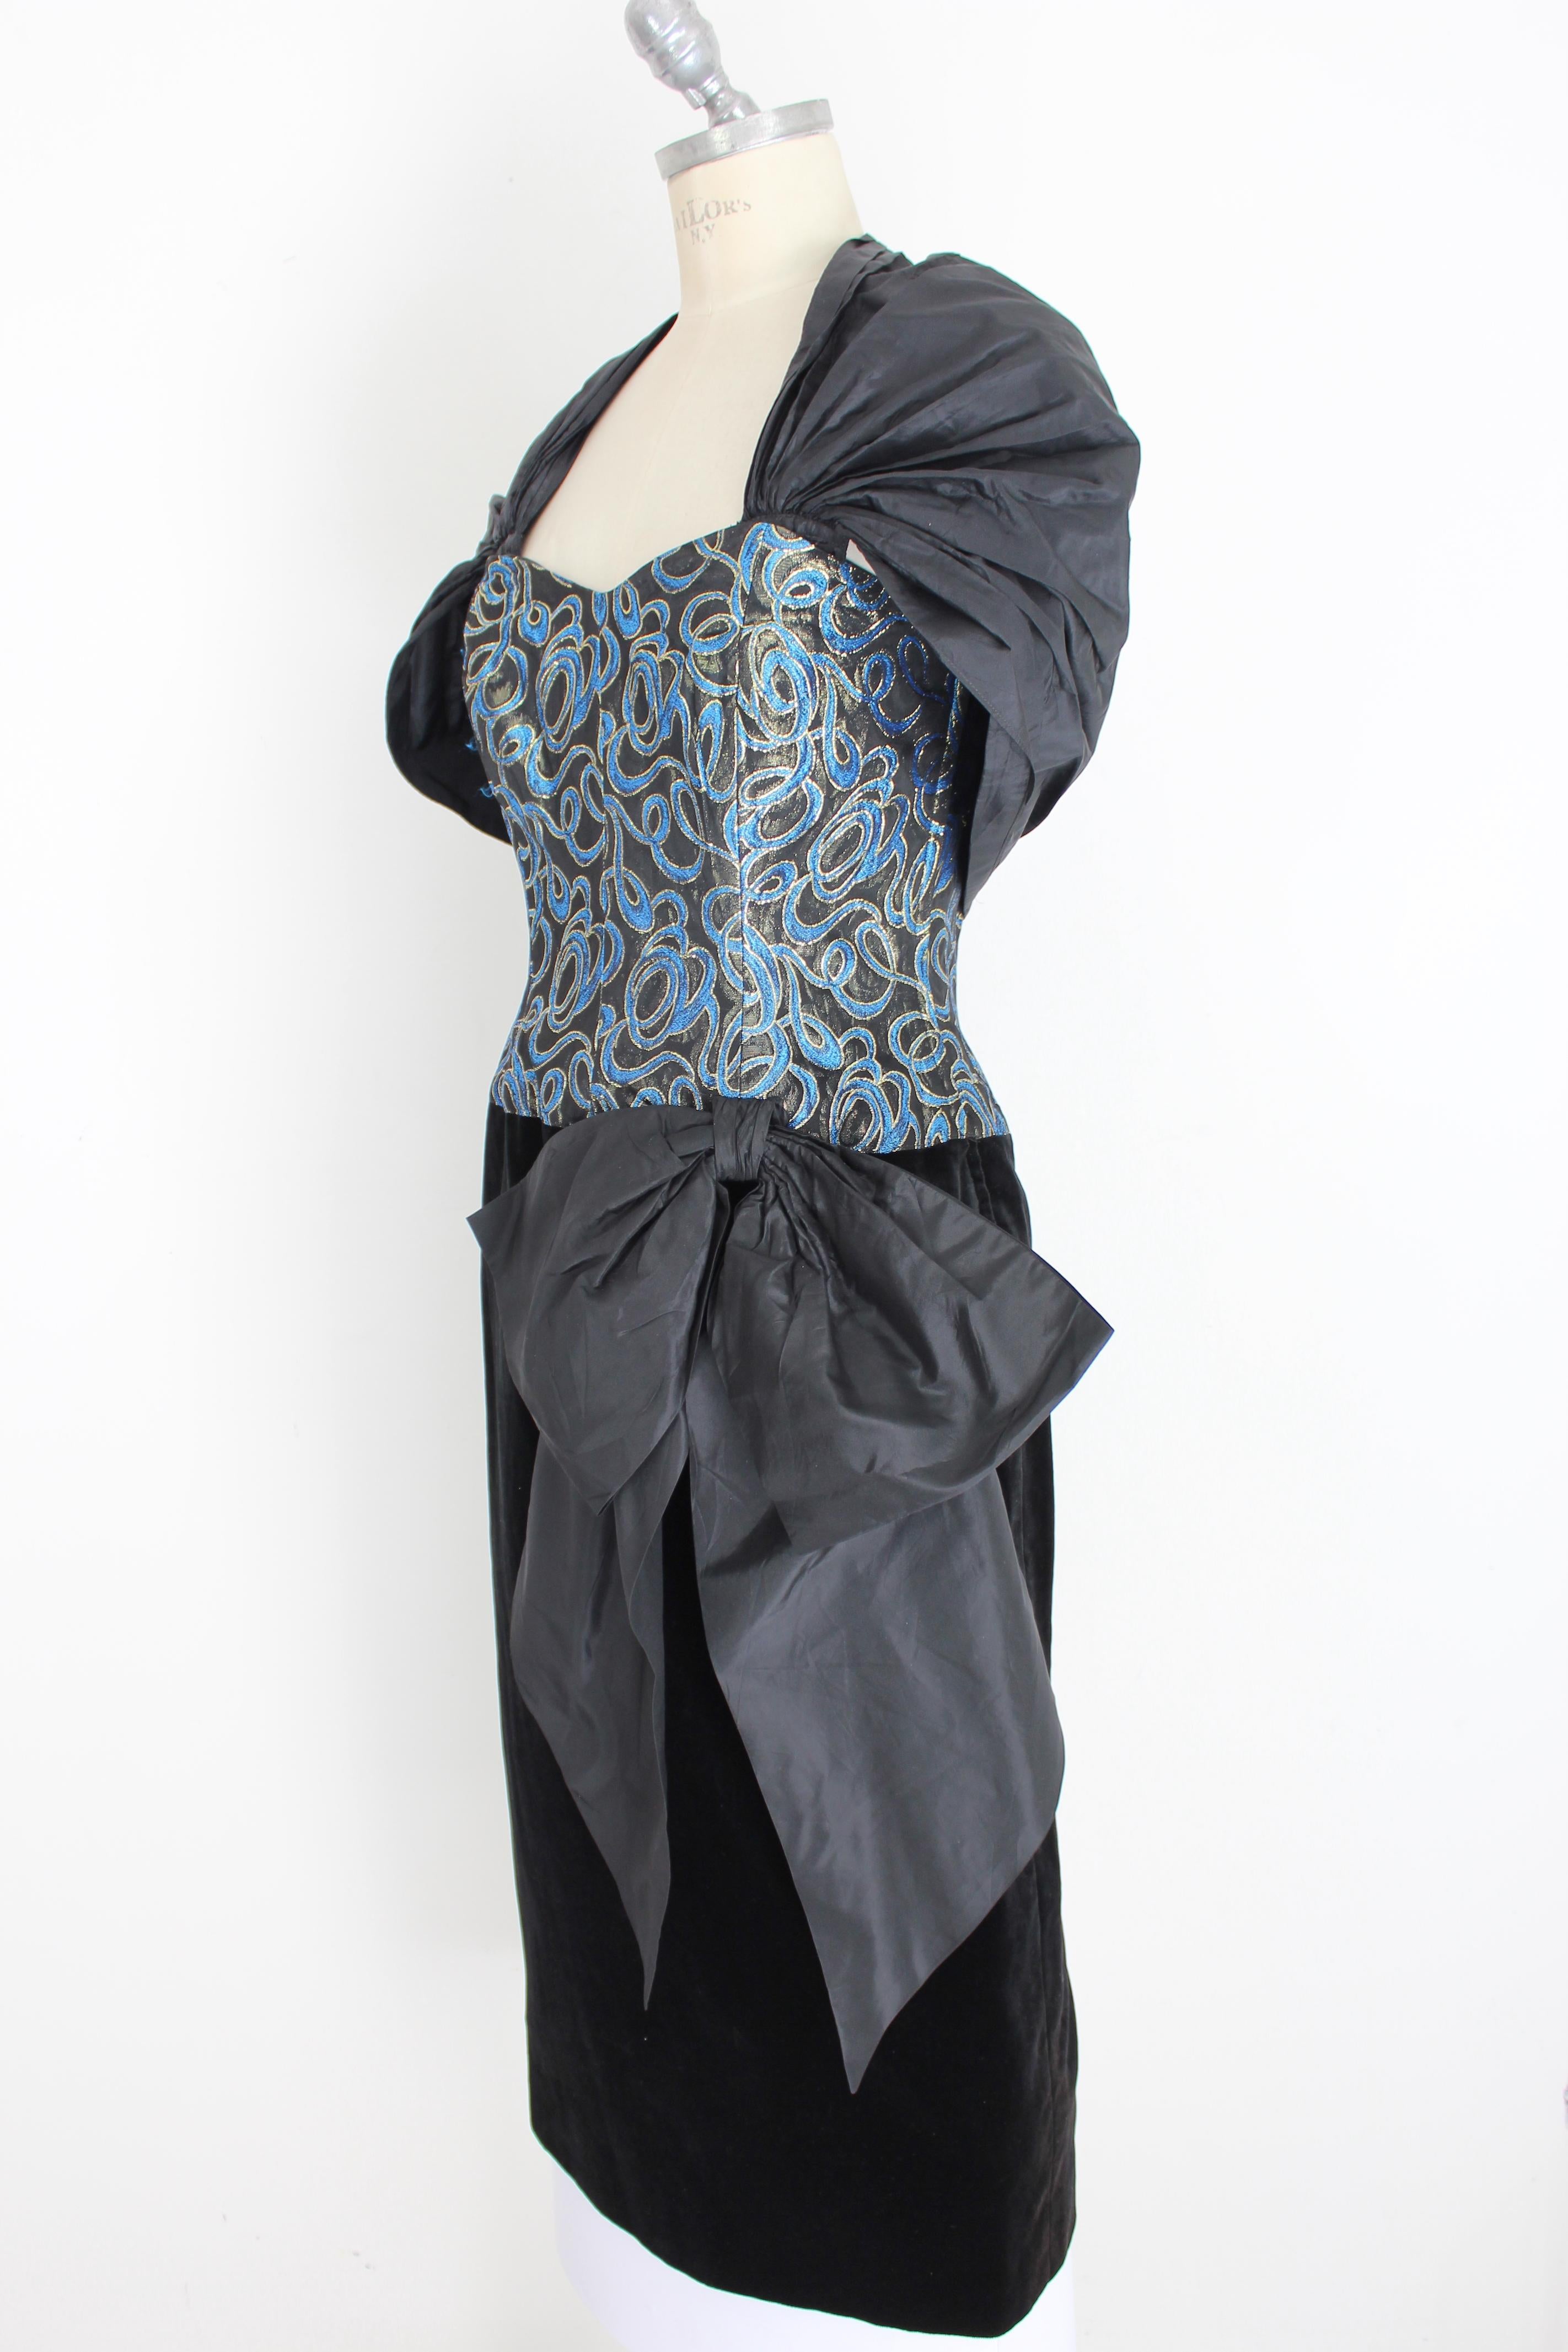 Guy Laroche vintage 70s woman dress. Evening dress, blue and gold damask bodice, internal boning. Black velvet skirt, on the side a large bow. Removable shrug with clip buttons. Fabric 63% acetate, 29% viscose 8% polyester. Lined interior with 73%